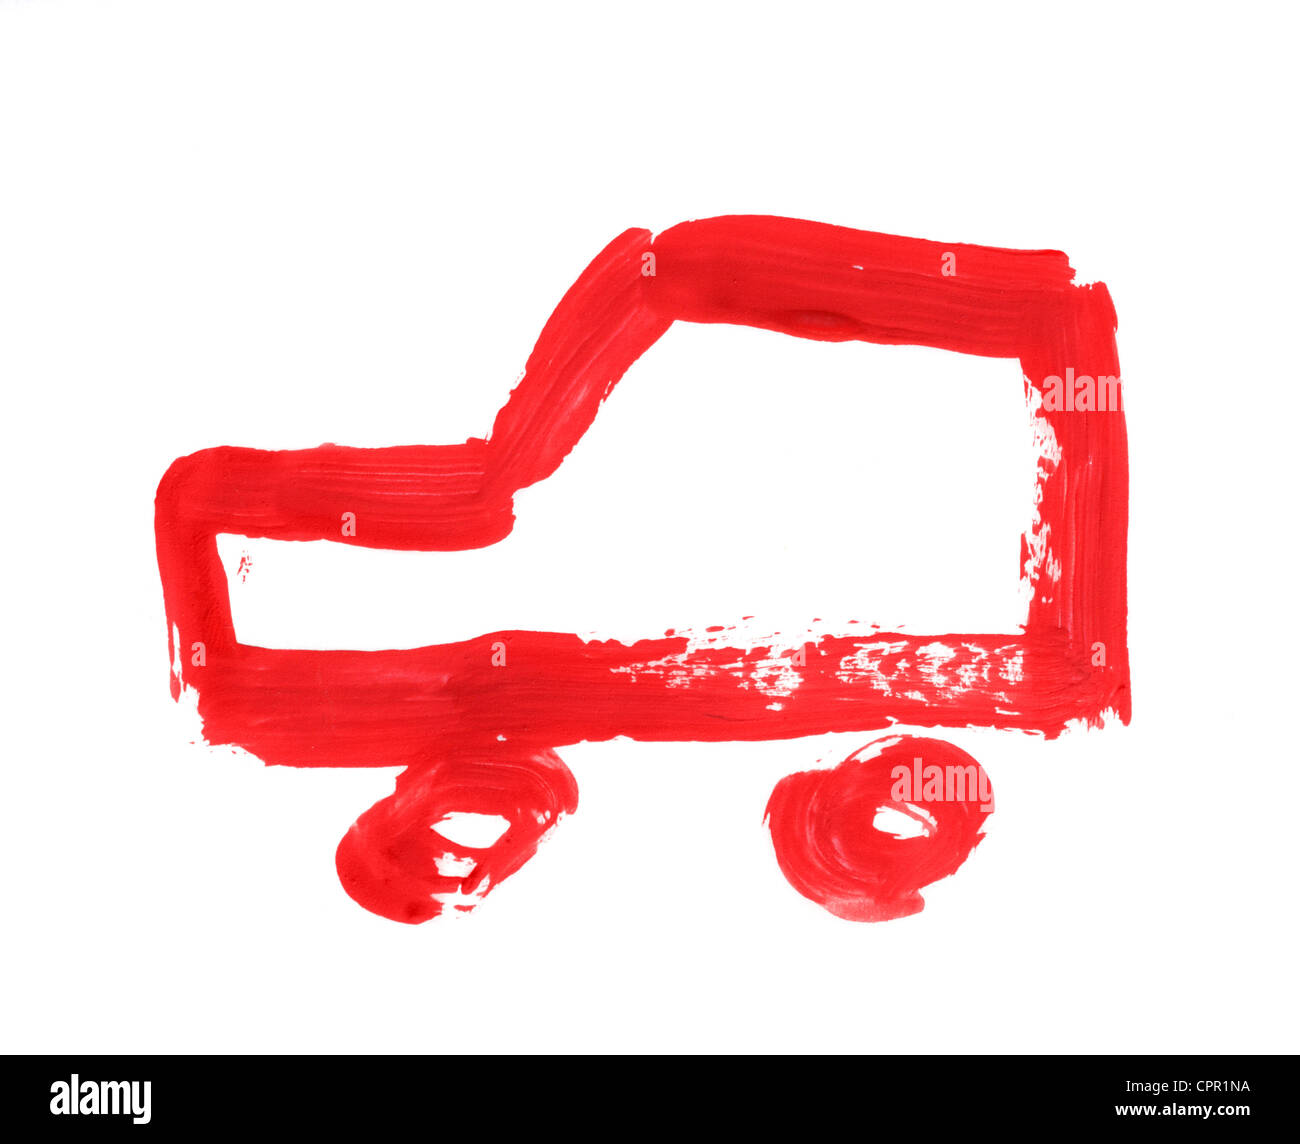 red car, straight line paint illustration by hand Stock Photo